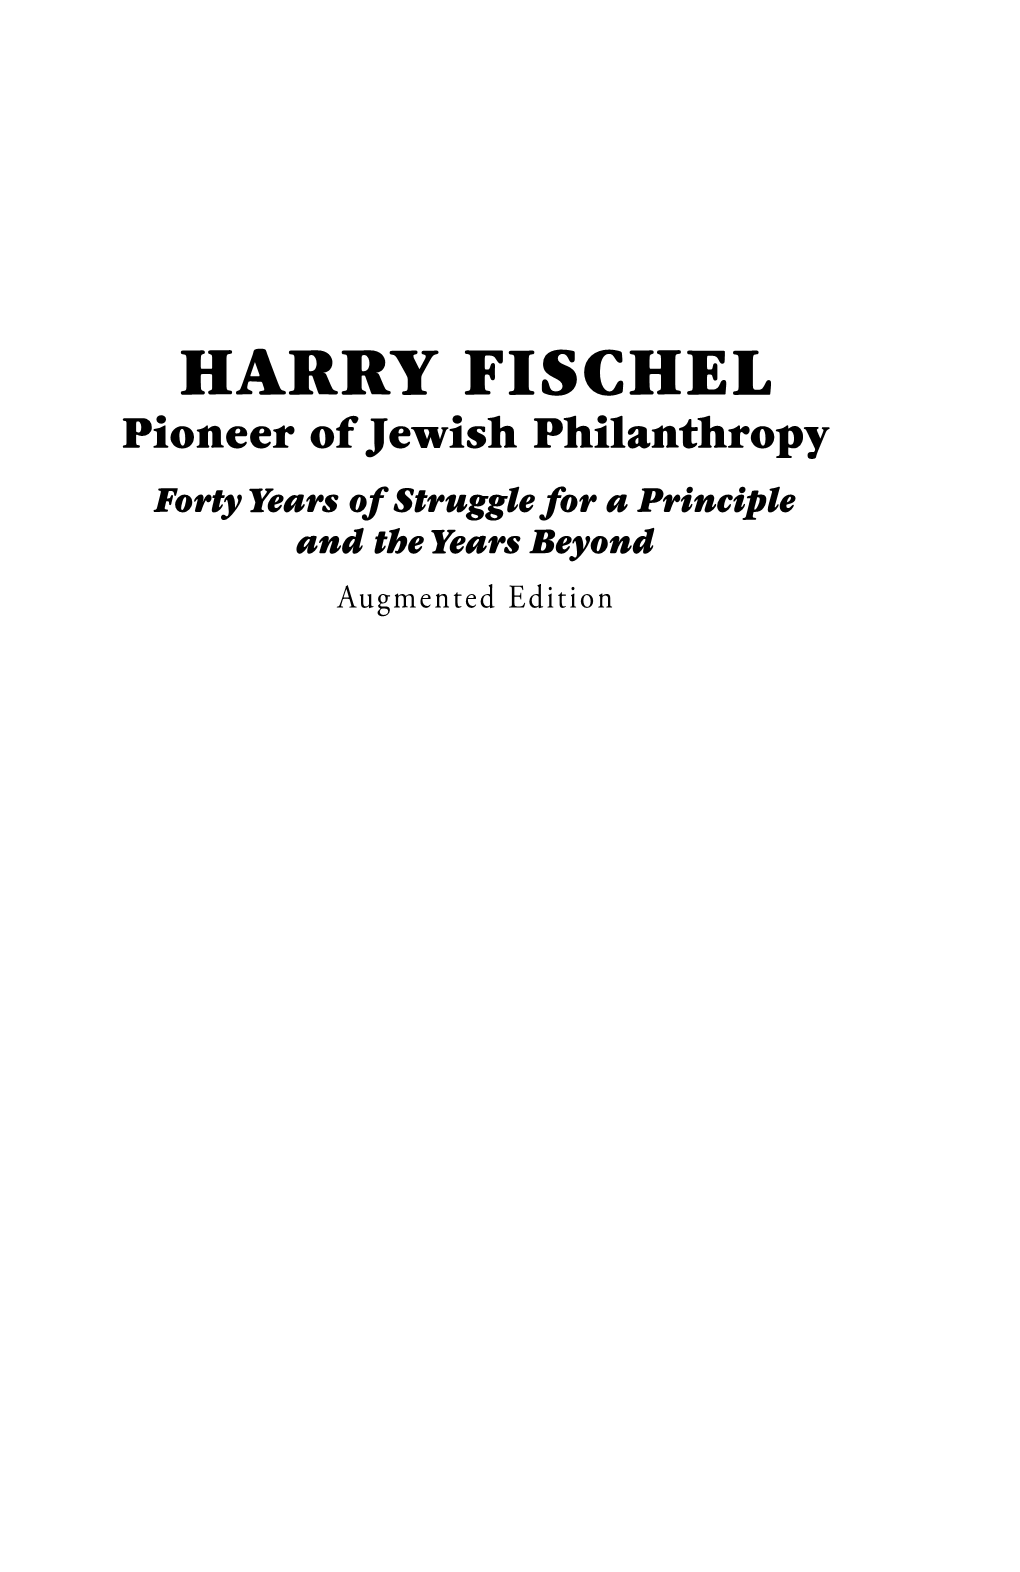 HARRY FISCHEL Pioneer of Jewish Philanthropy Forty Years of Struggle for a Principle and the Years Beyond Augmented Edition